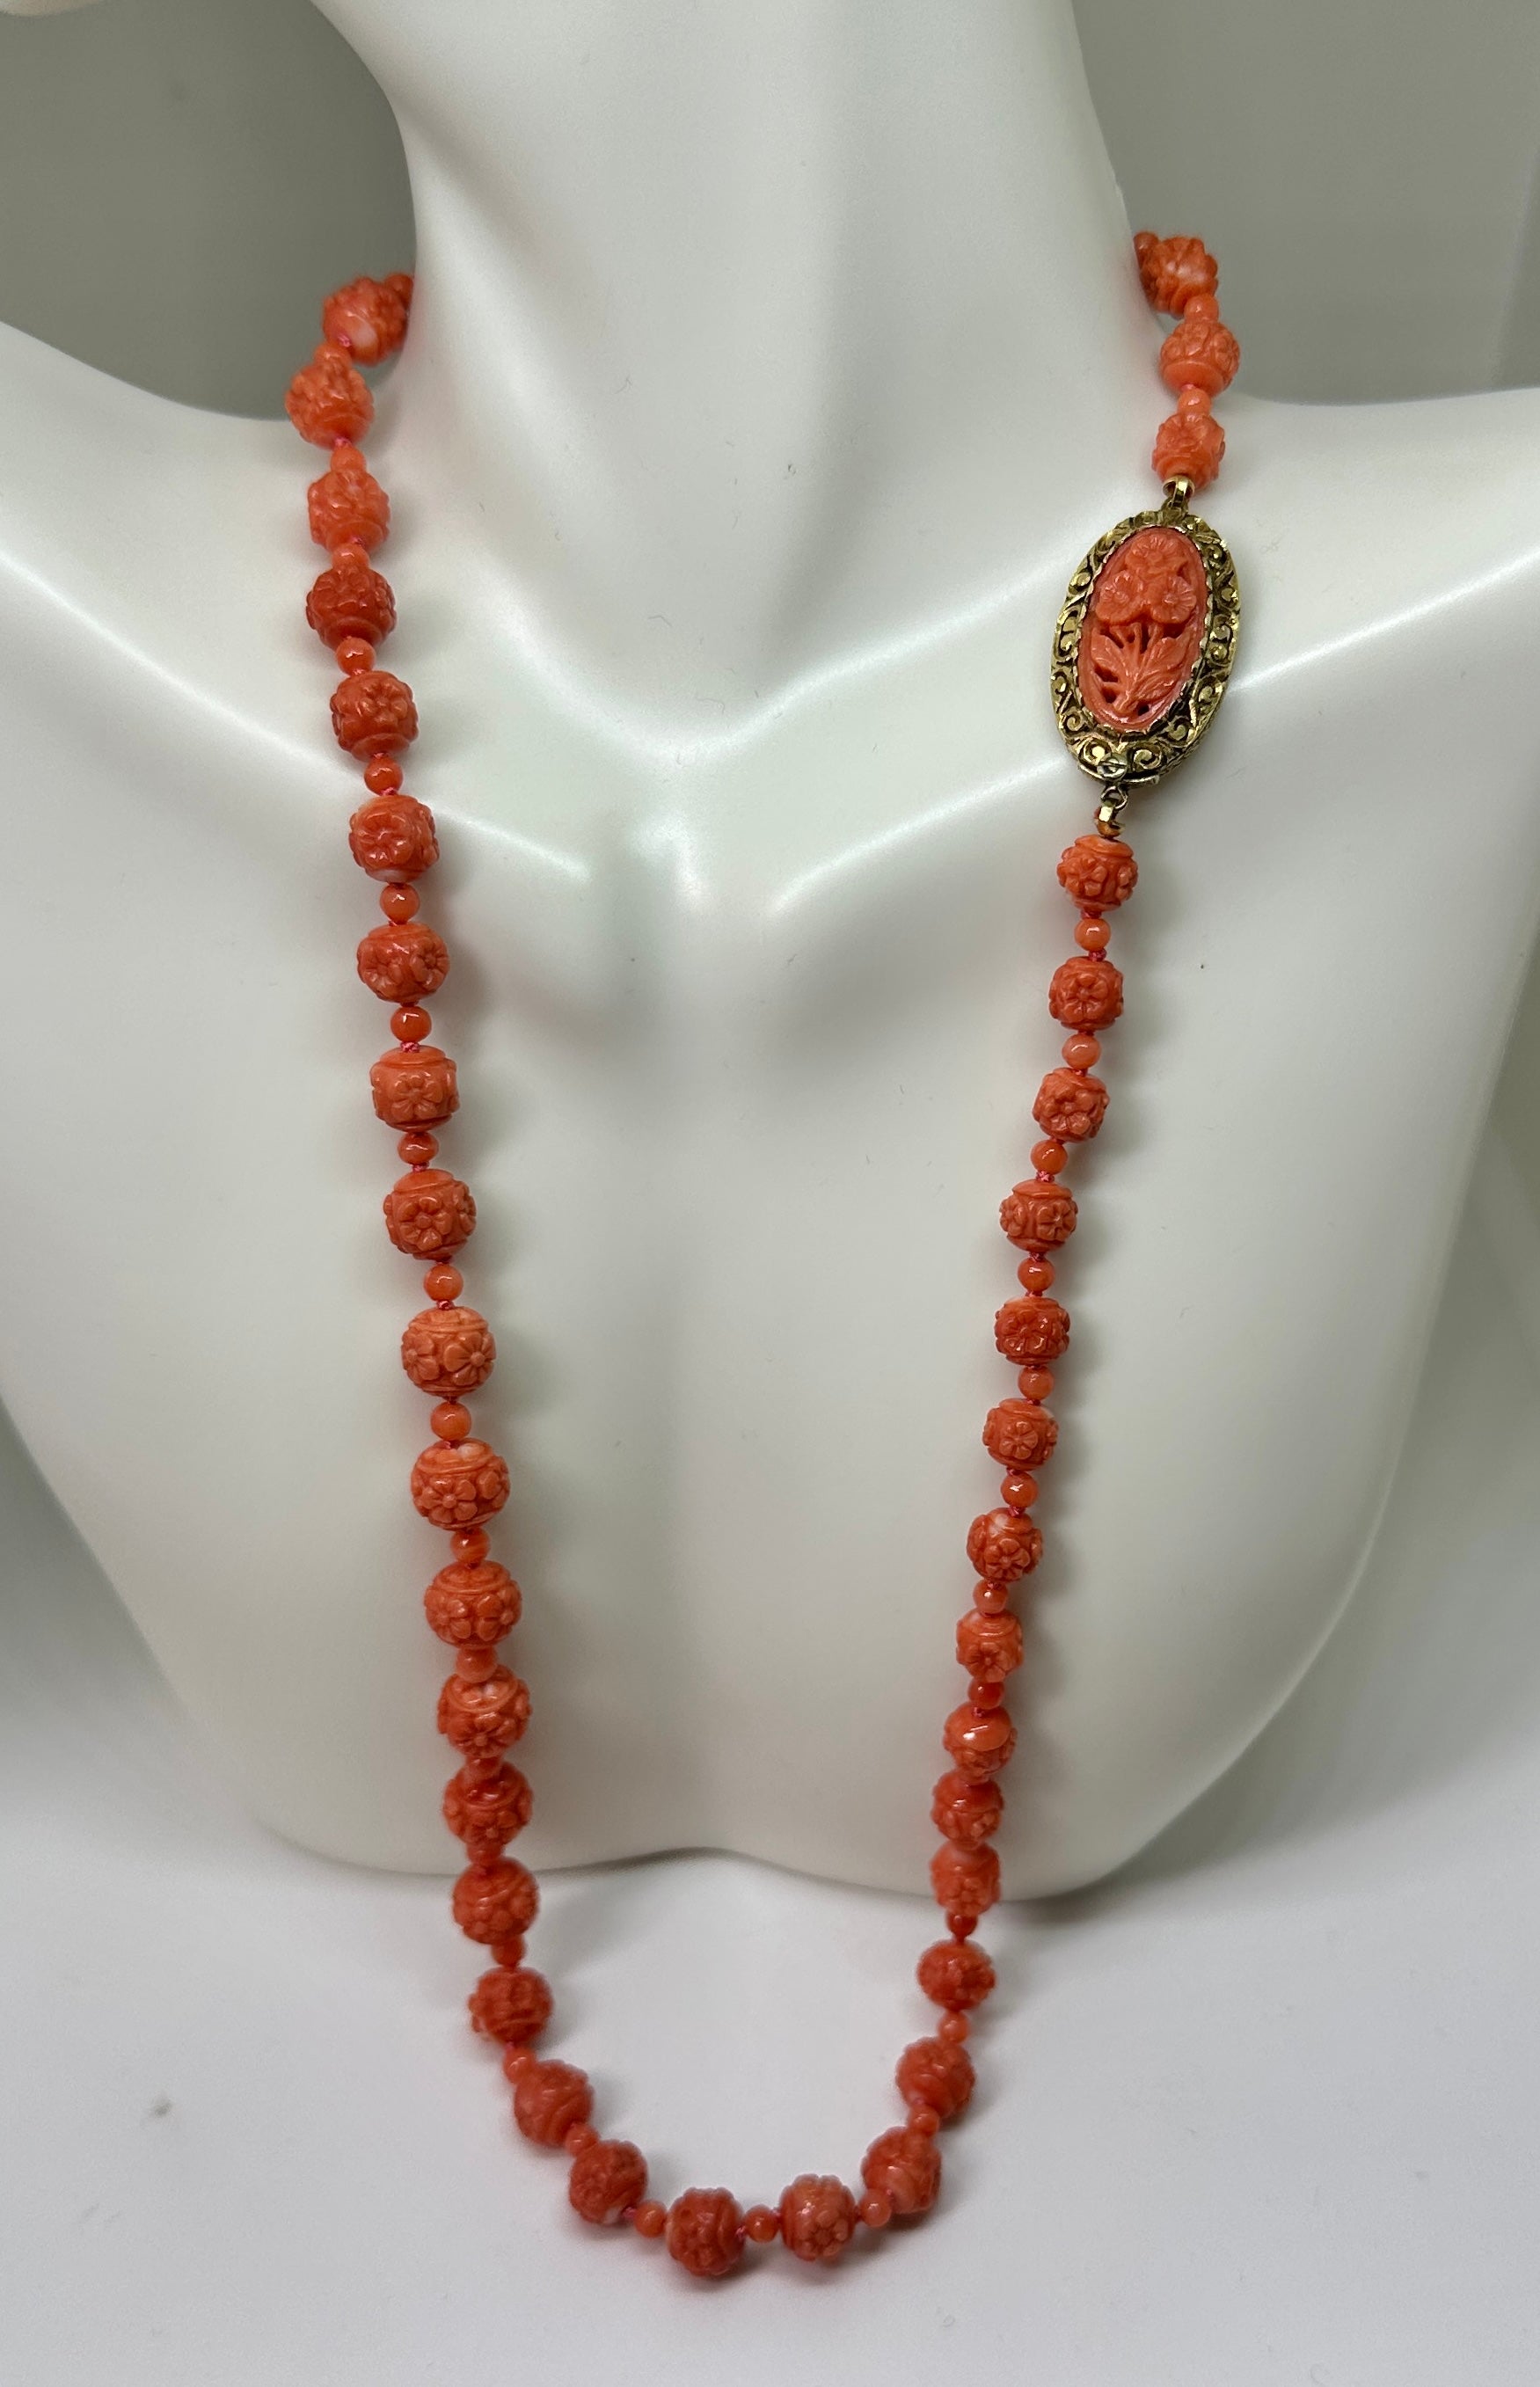 Indulge in a magnificent and very rare Antique Victorian - Art Deco Coral Necklace of graduated hand carved Coral Beads with Forget Me Not Flowers carved around each bead and with a stunning carved floral clasp in 18 Karat Gold.  The clasp depicts